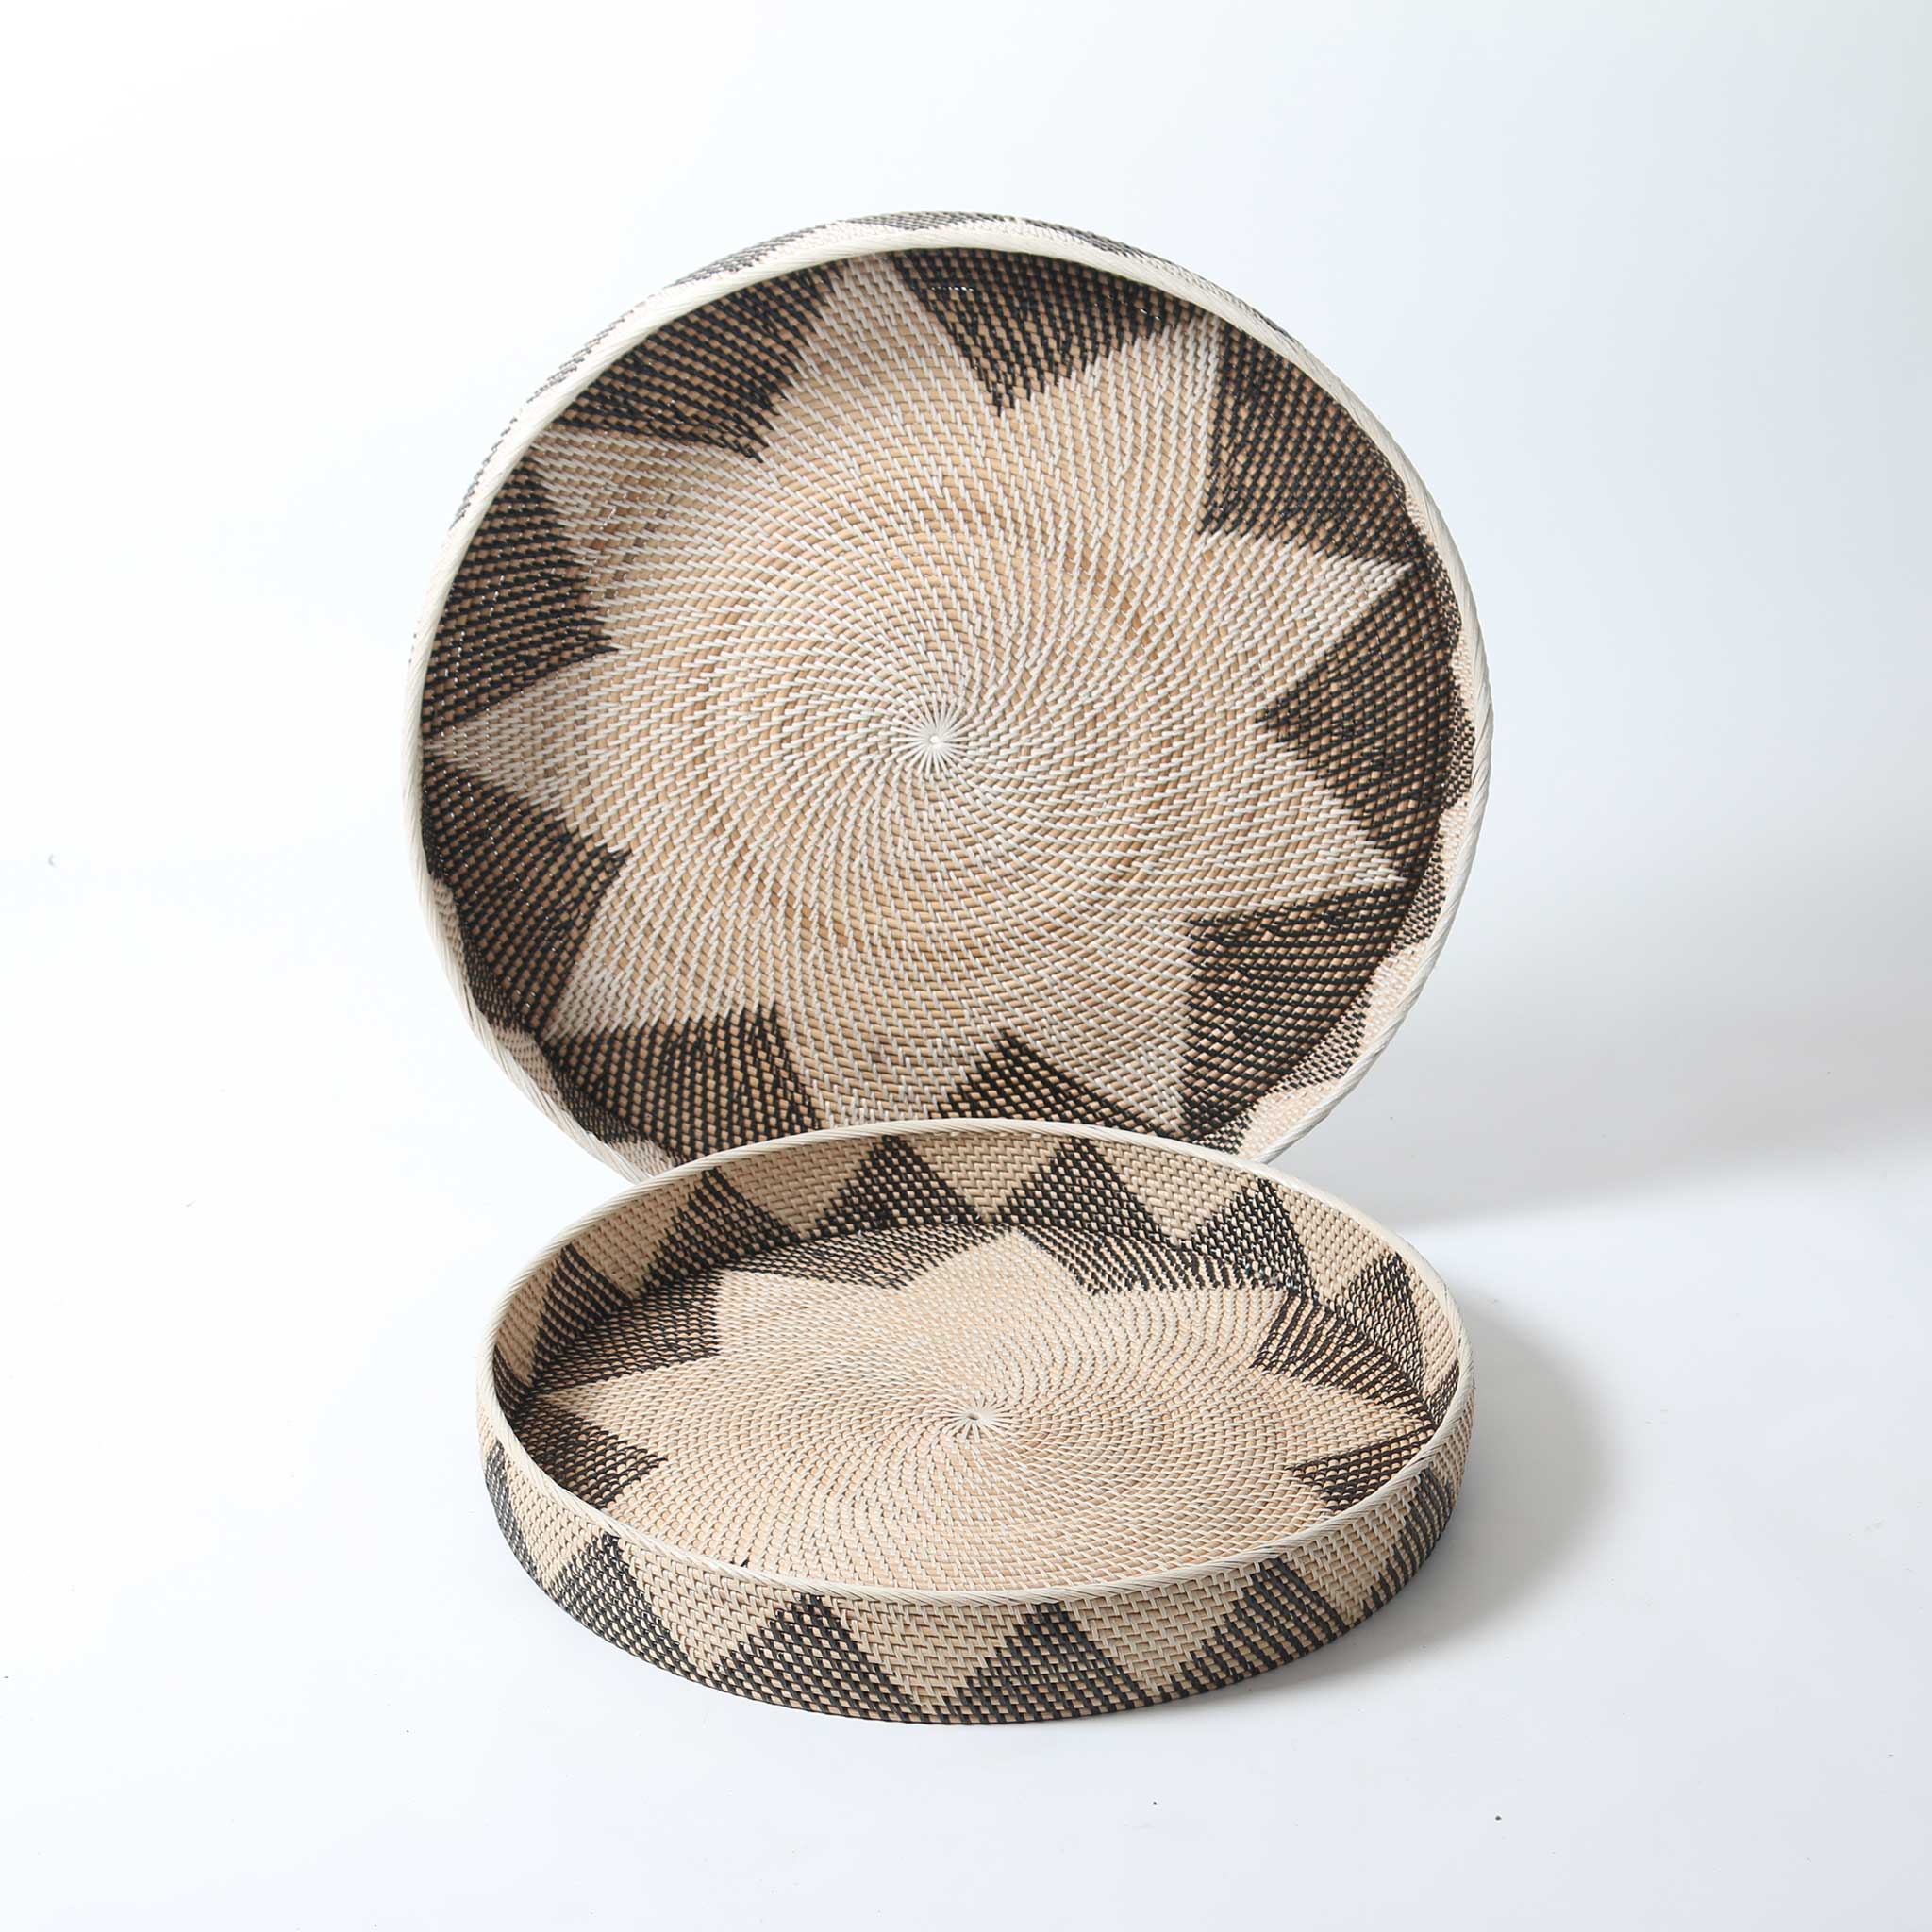 Star Patterned Black and White Round Woven Rattan Tray